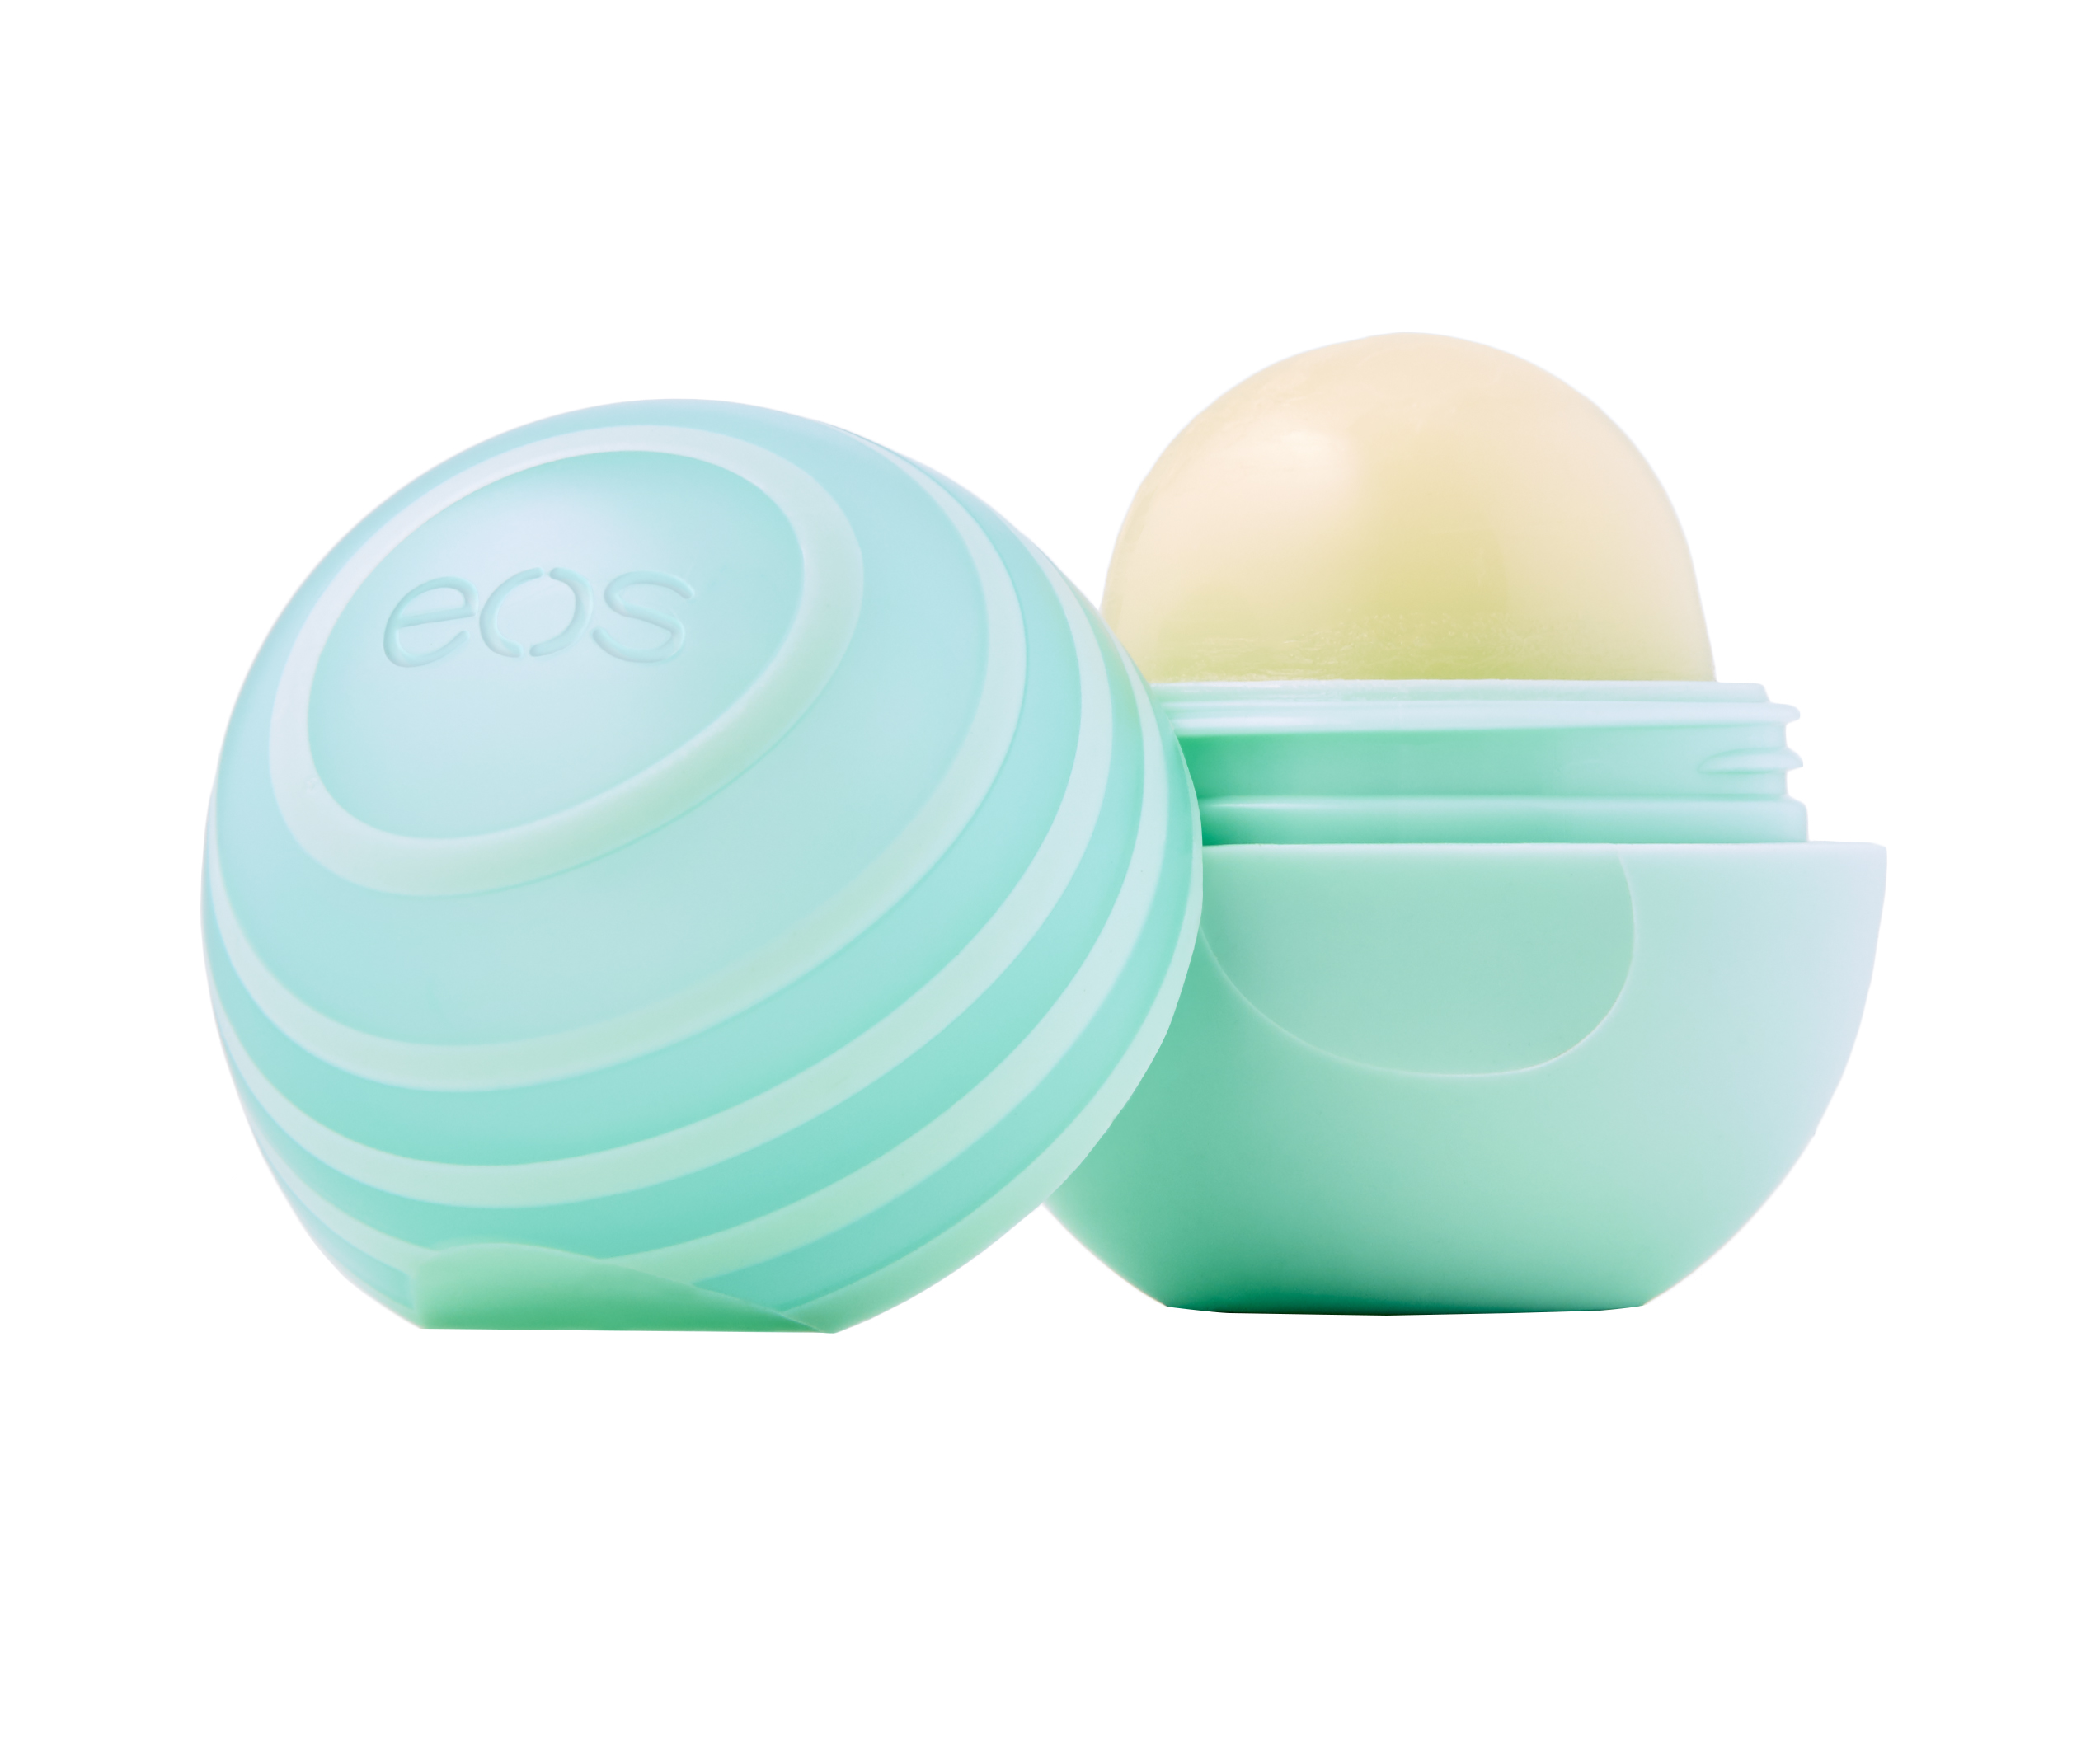 eos Shea + SPF Lip Balm Sphere - Aloe | SPF 30 and Water Resistant | 0.25 oz - image 2 of 5